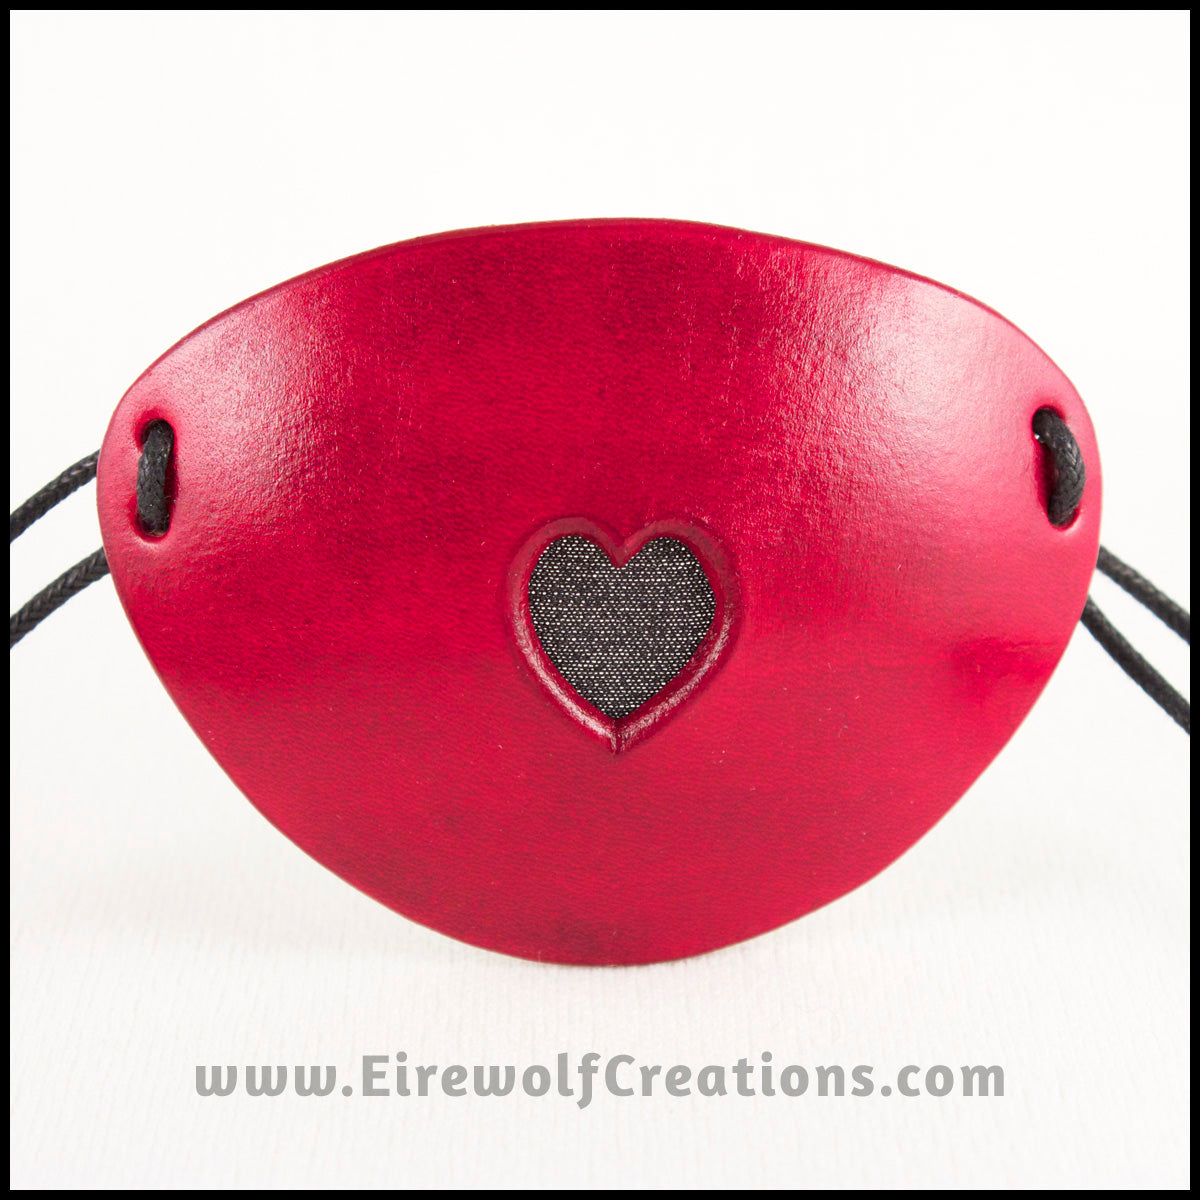 See-through Heart Red Leather Pirate Eye Patch handmade masquerade